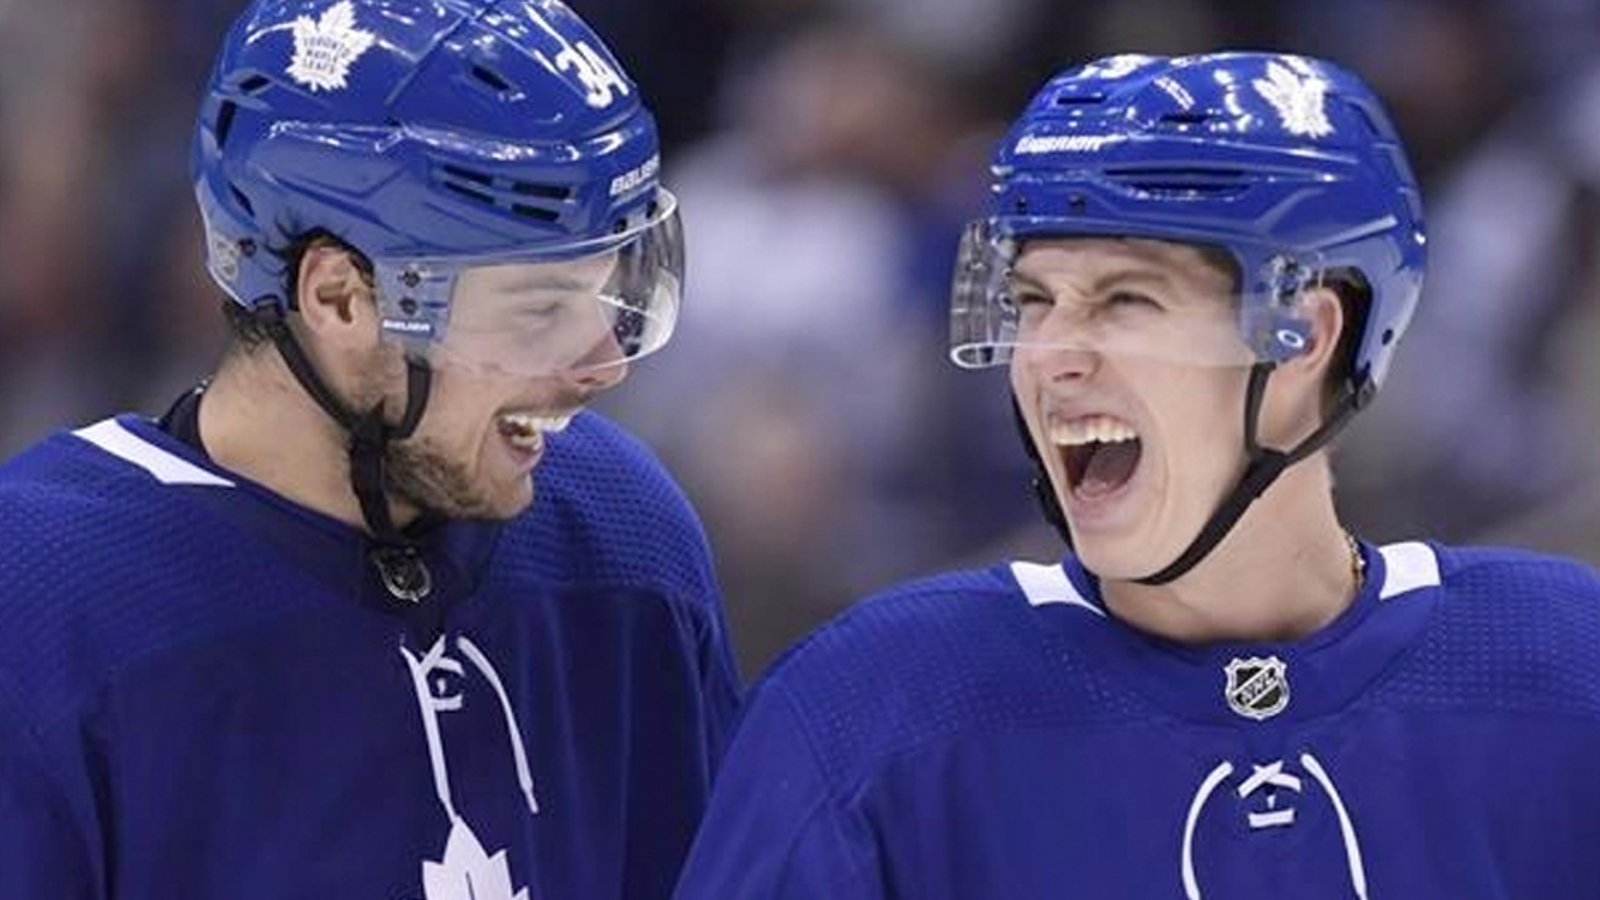 Leafs GM Kyle Dubas confirms that he will not trade Matthews or Marner